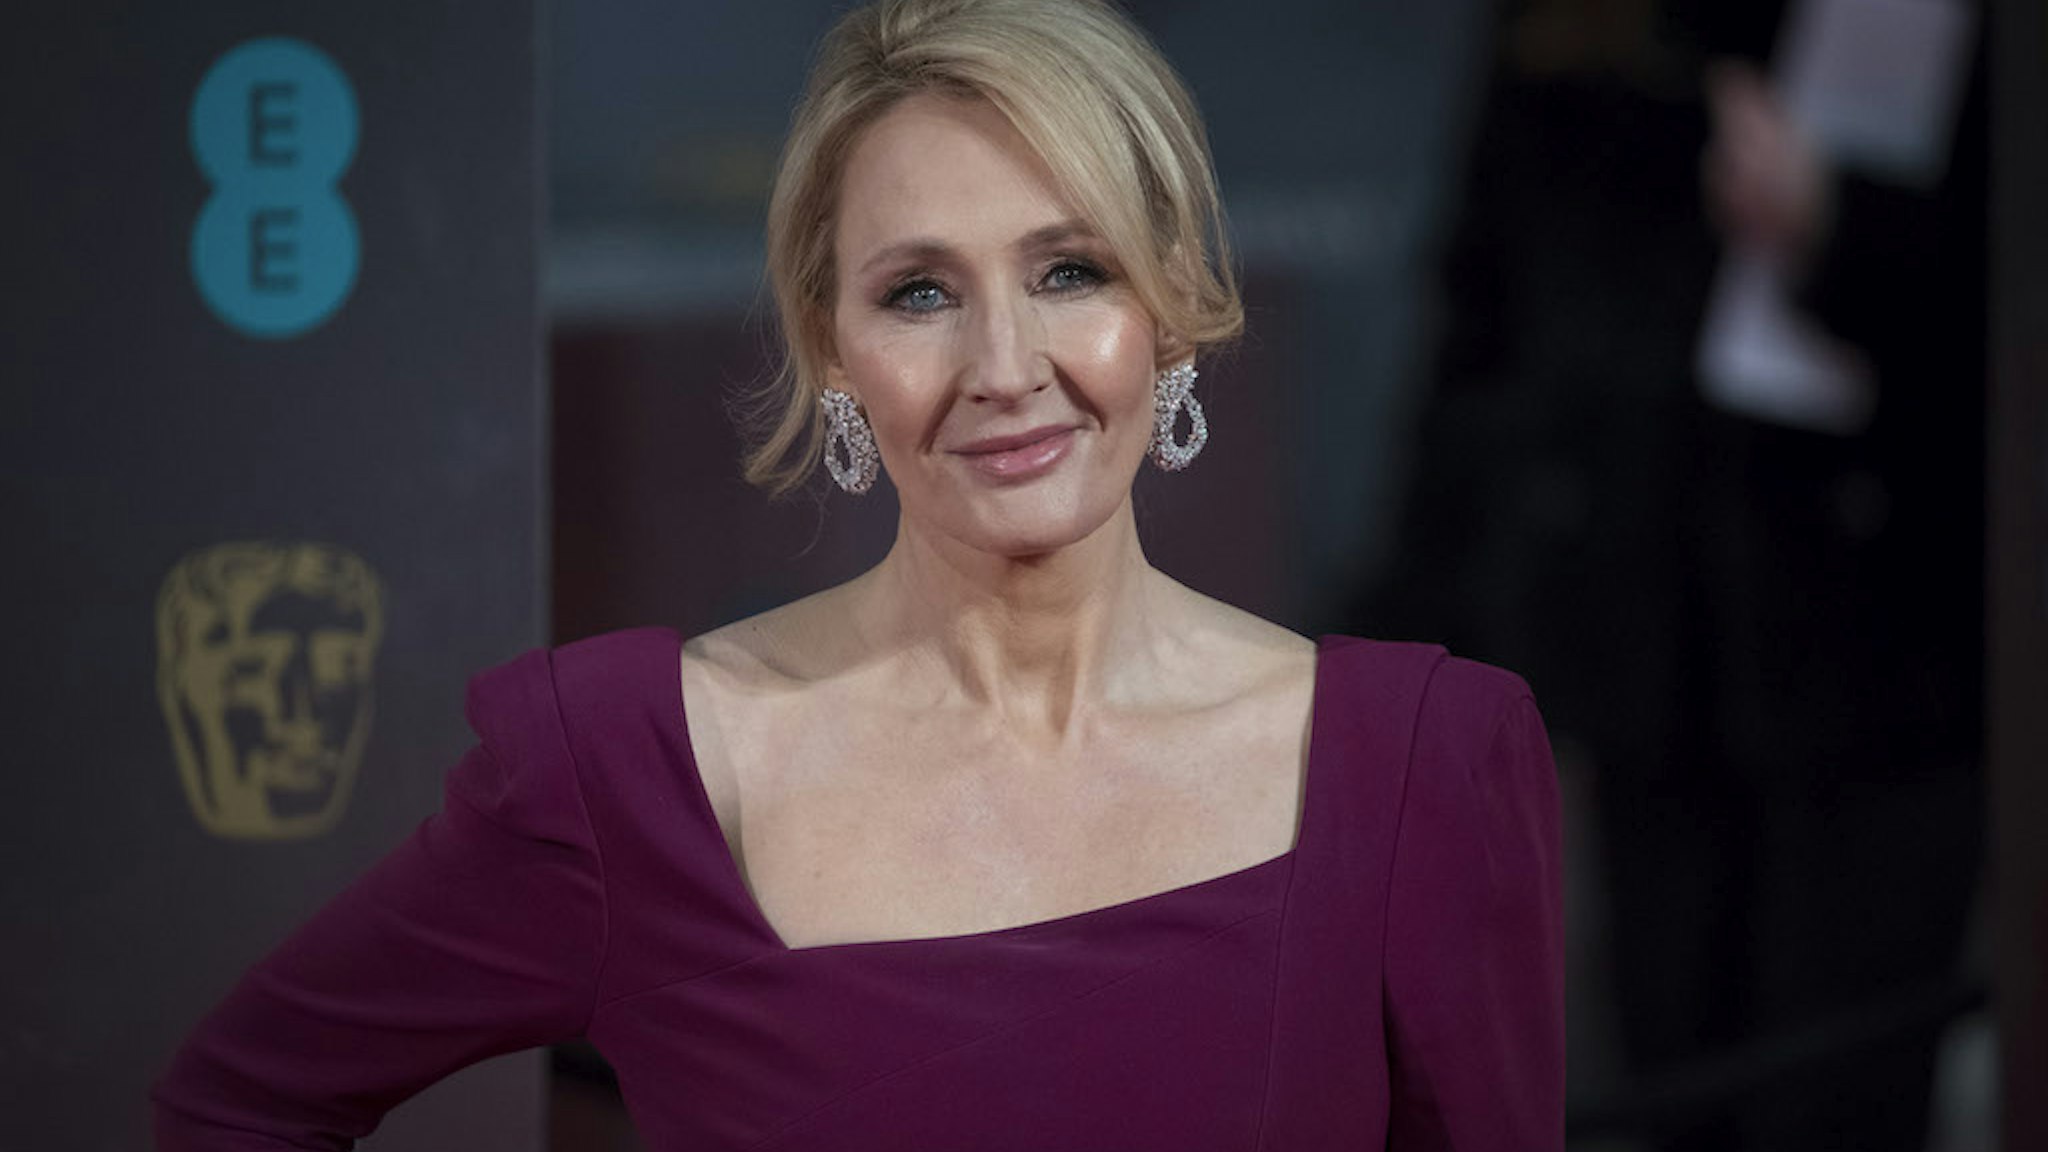 J.K. Rowling attends the 70th EE British Academy Film Awards (BAFTA) at Royal Albert Hall on February 12, 2017 in London, England.